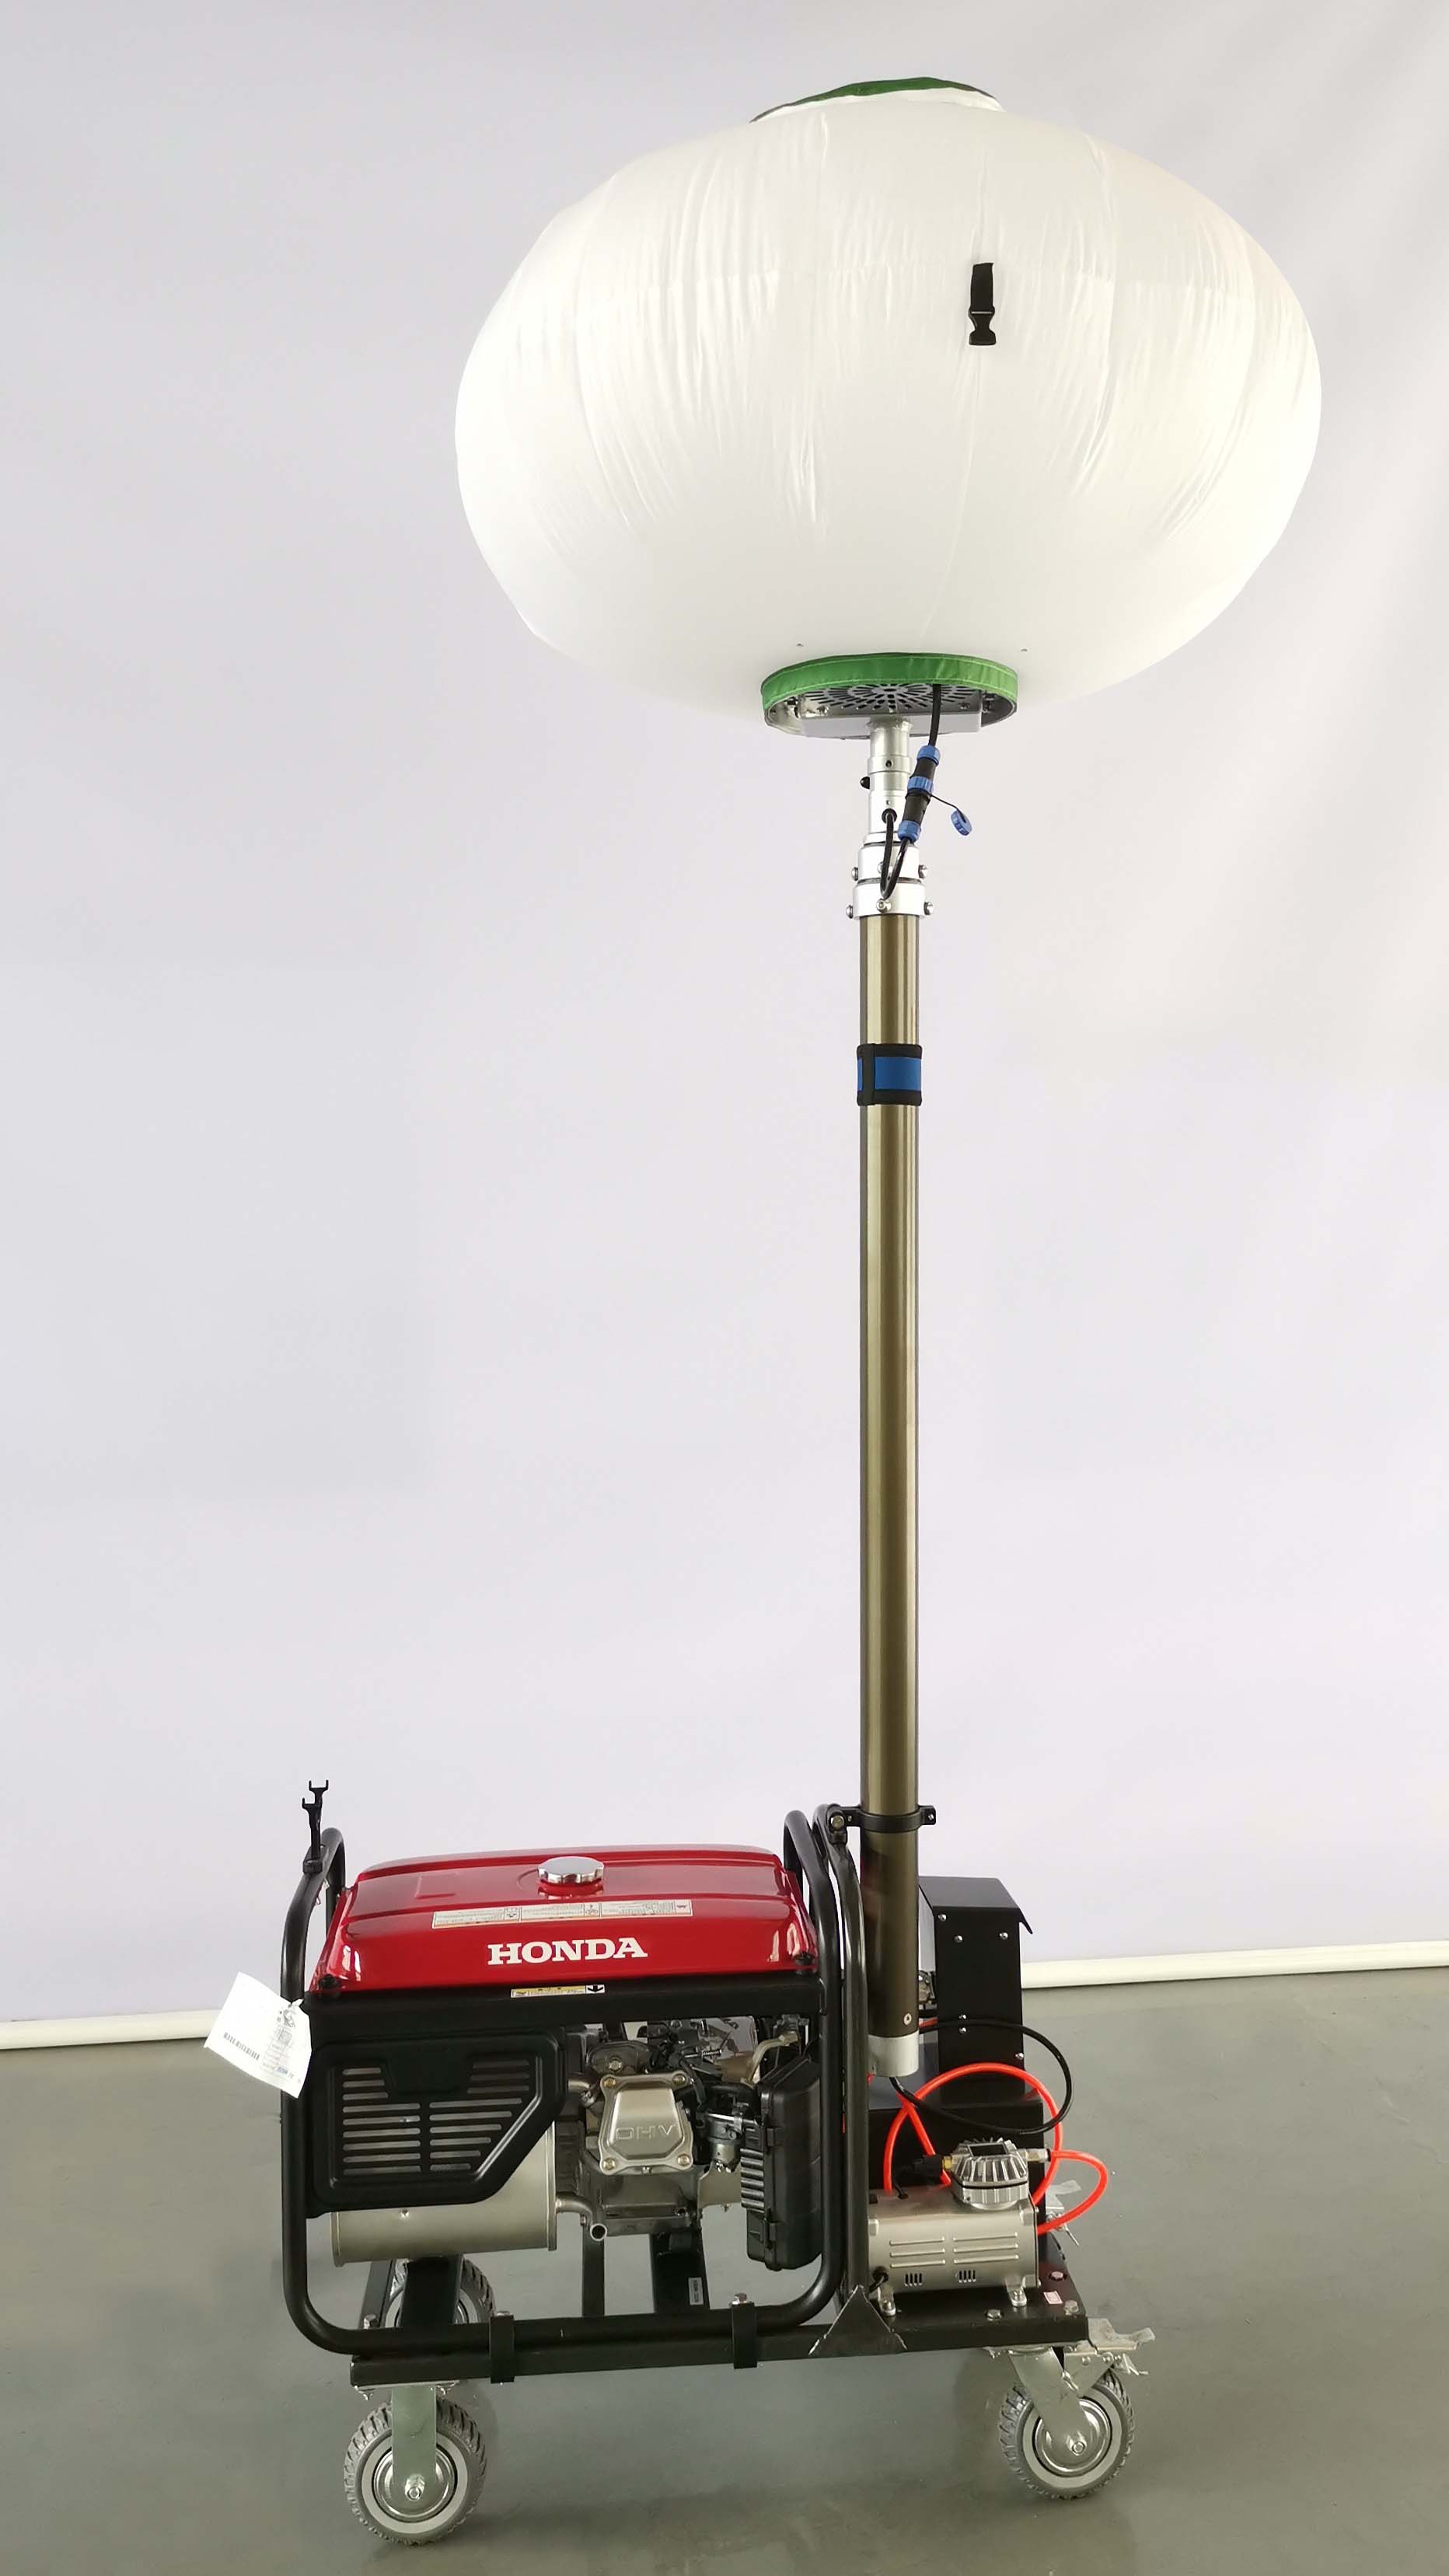 Hot Sale 4M Max Height Tower Light Trailer Hand Elevate LED Balloon Light Towers For Emergency Light